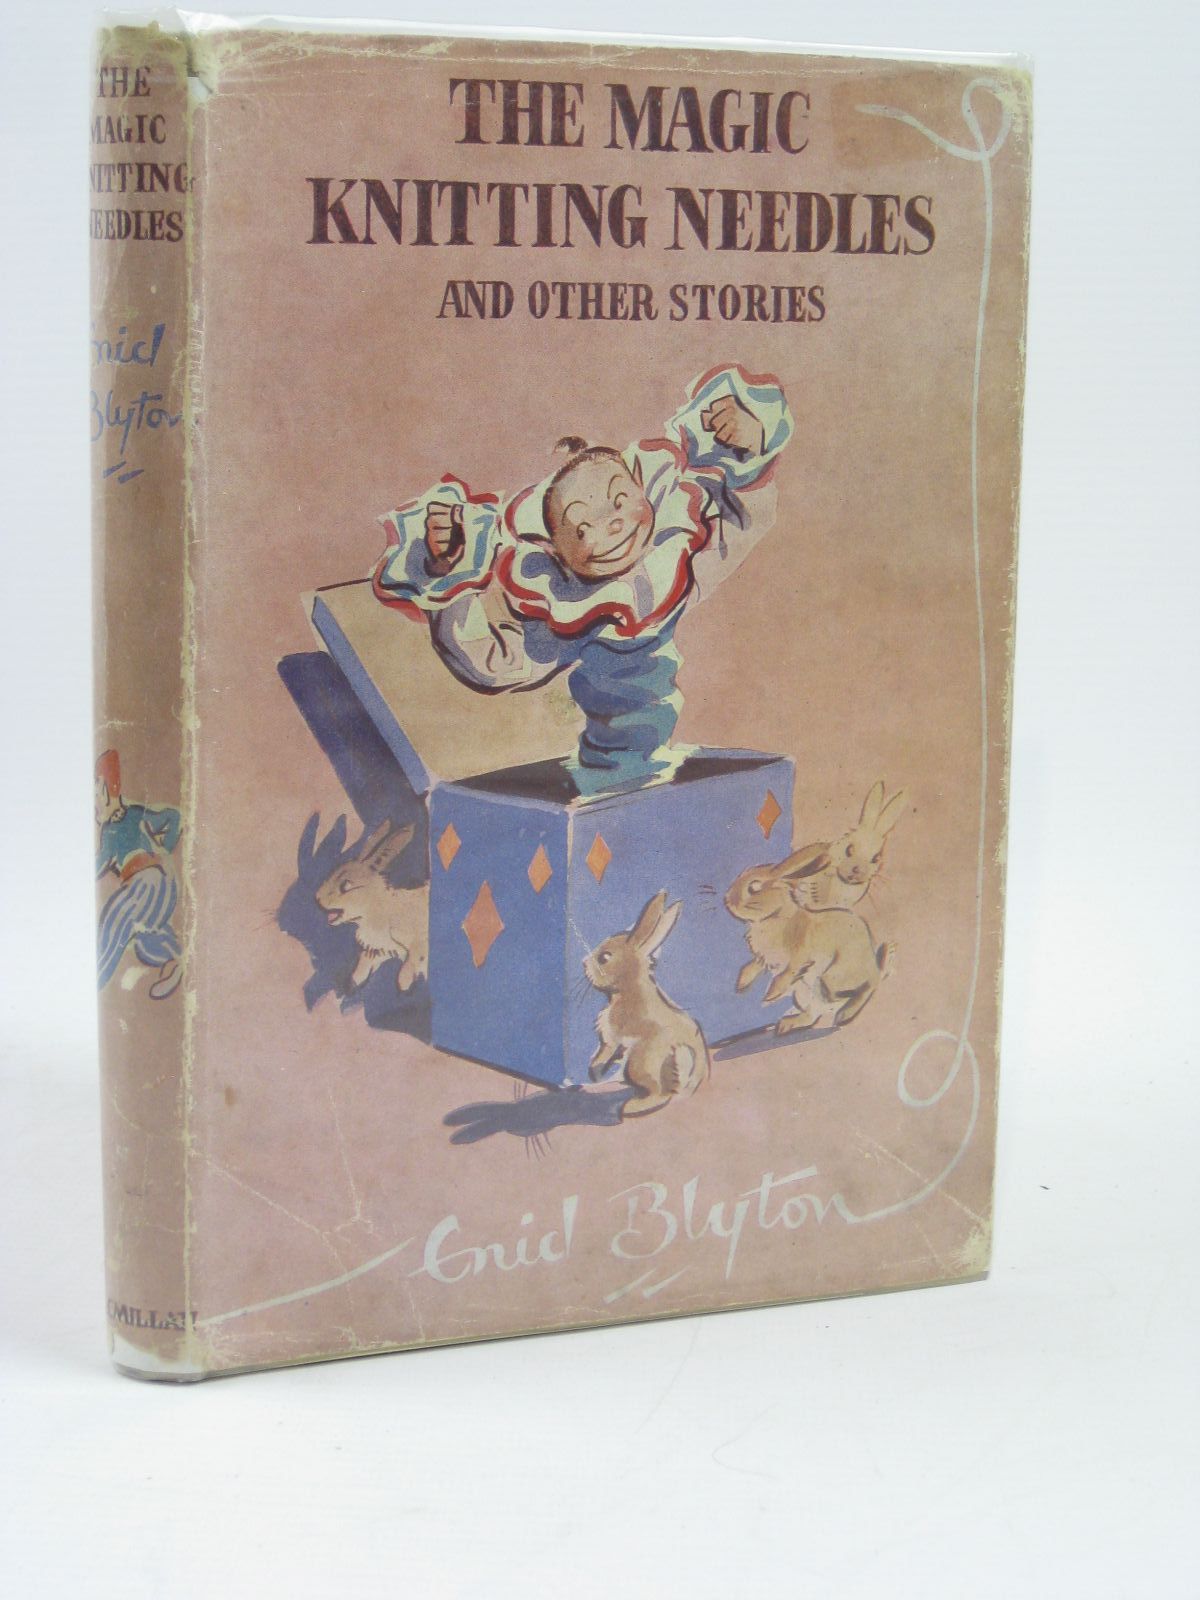 Cover of THE MAGIC KNITTING NEEDLES AND OTHER STORIES by Enid Blyton